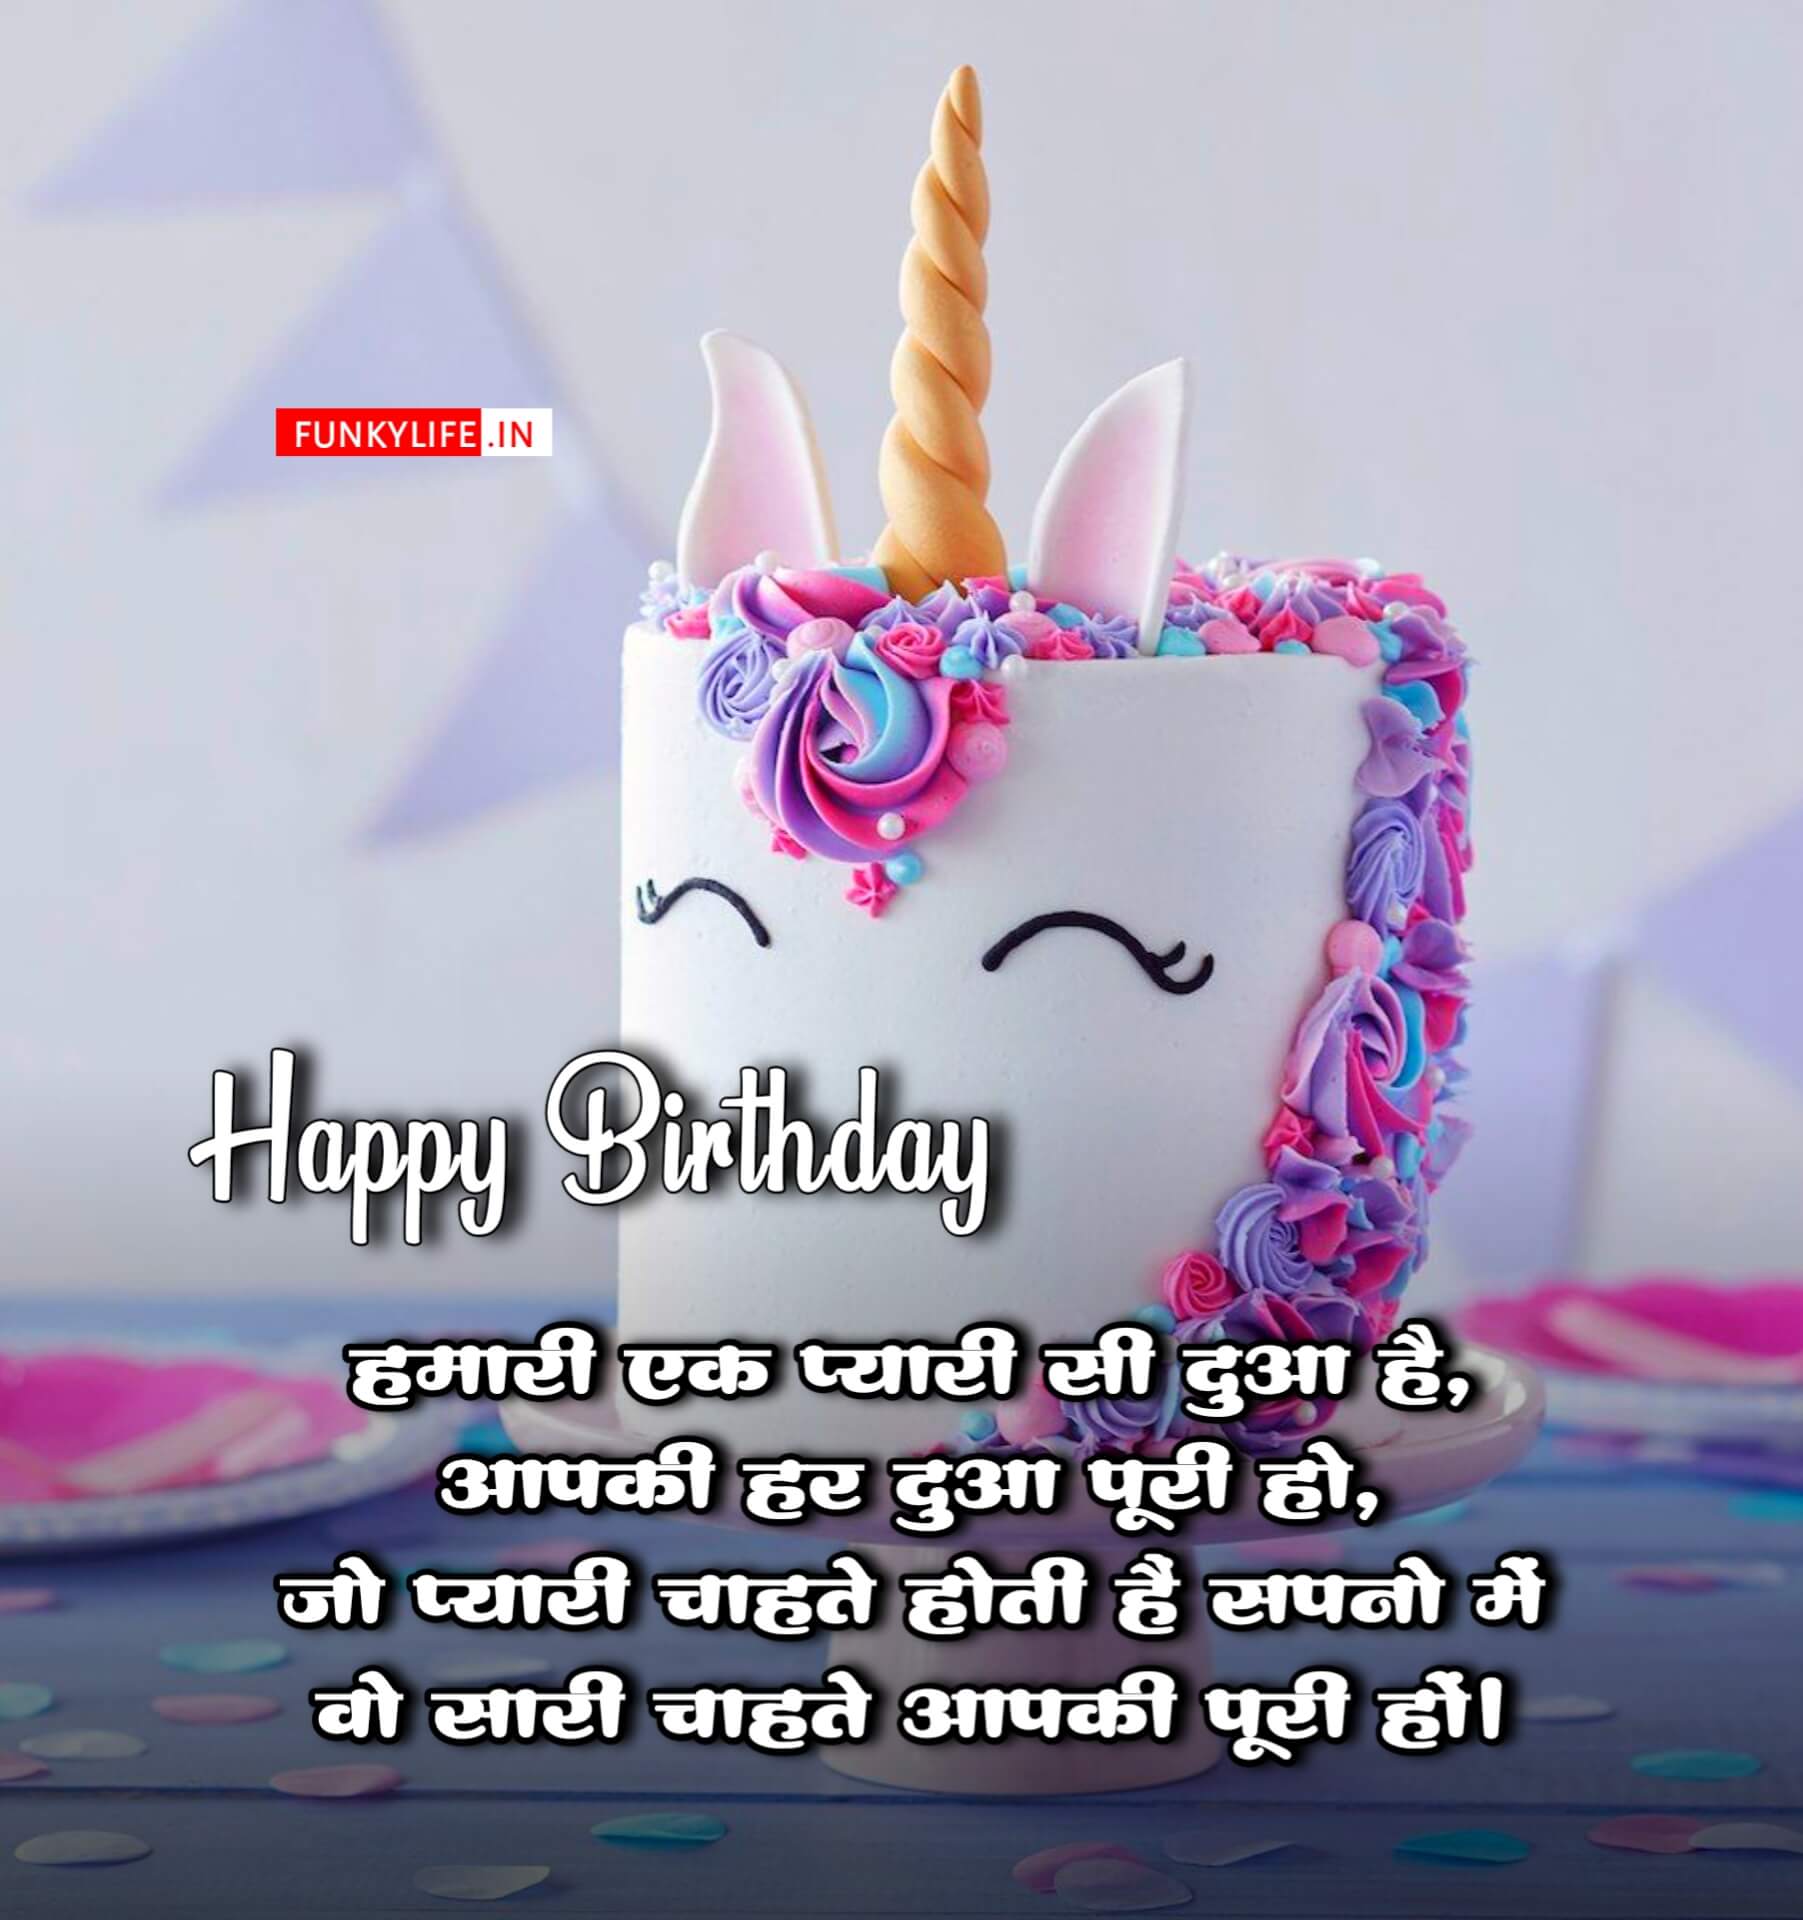 happy birthday wishes in Hindi with cake